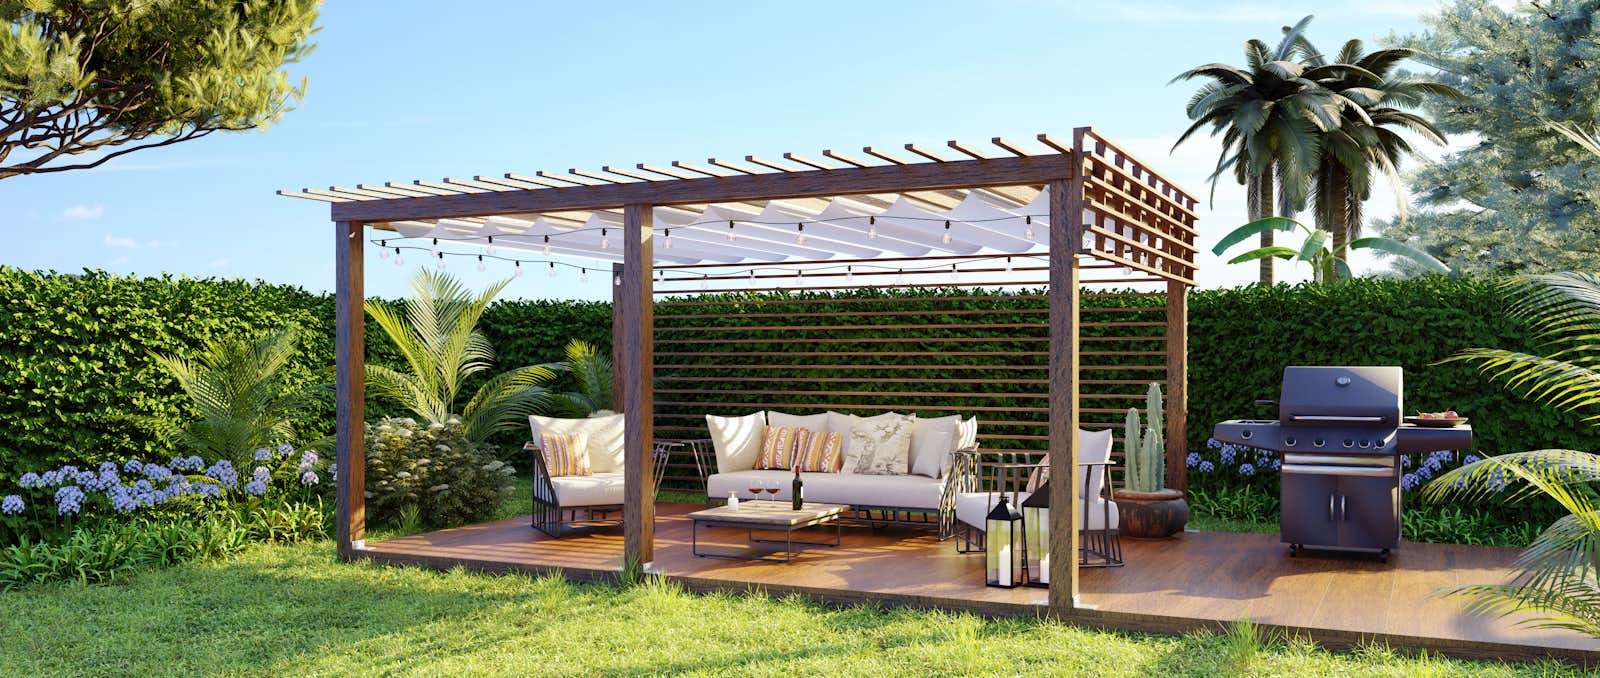 How To Plan the Perfect Patio